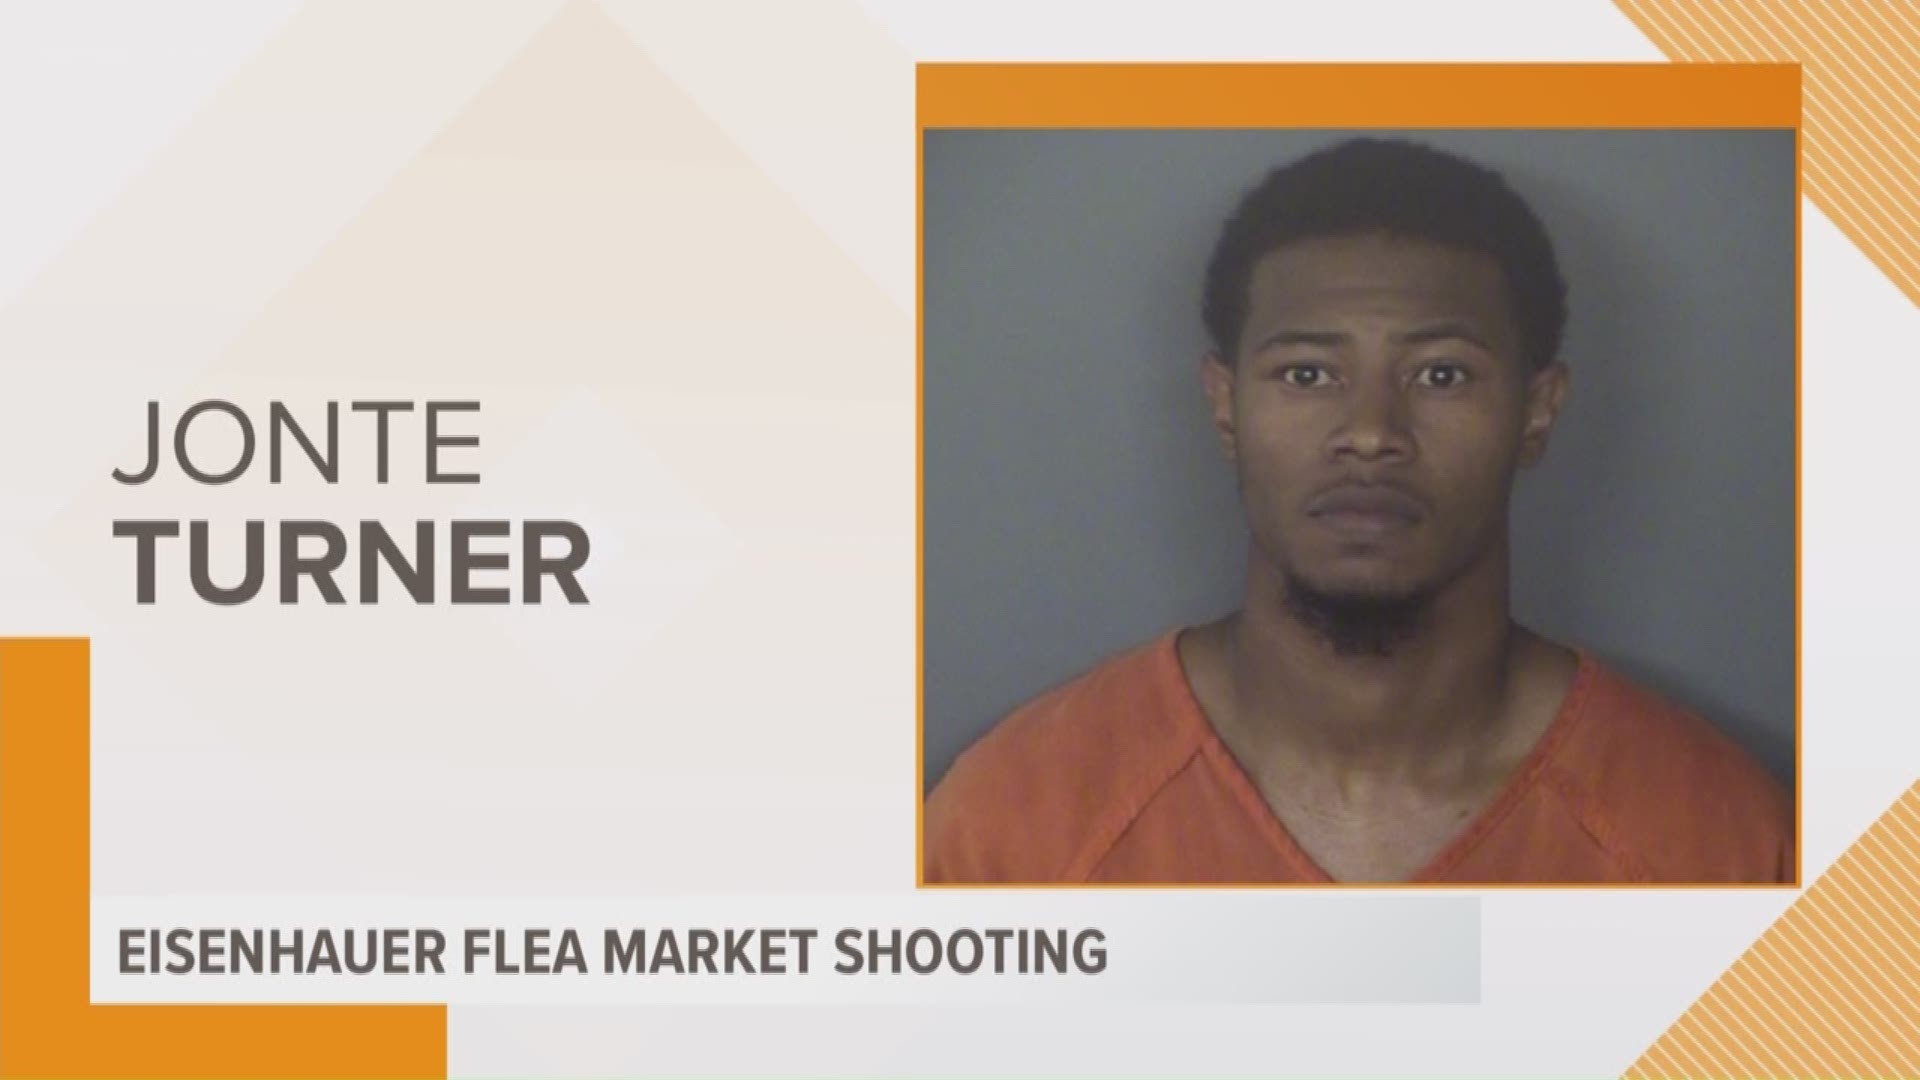 SAPD arrested a young man wanted for a deadly shooting at Eisenhauer flea market. 20 year old Jonte Turner is now facing murder charges.